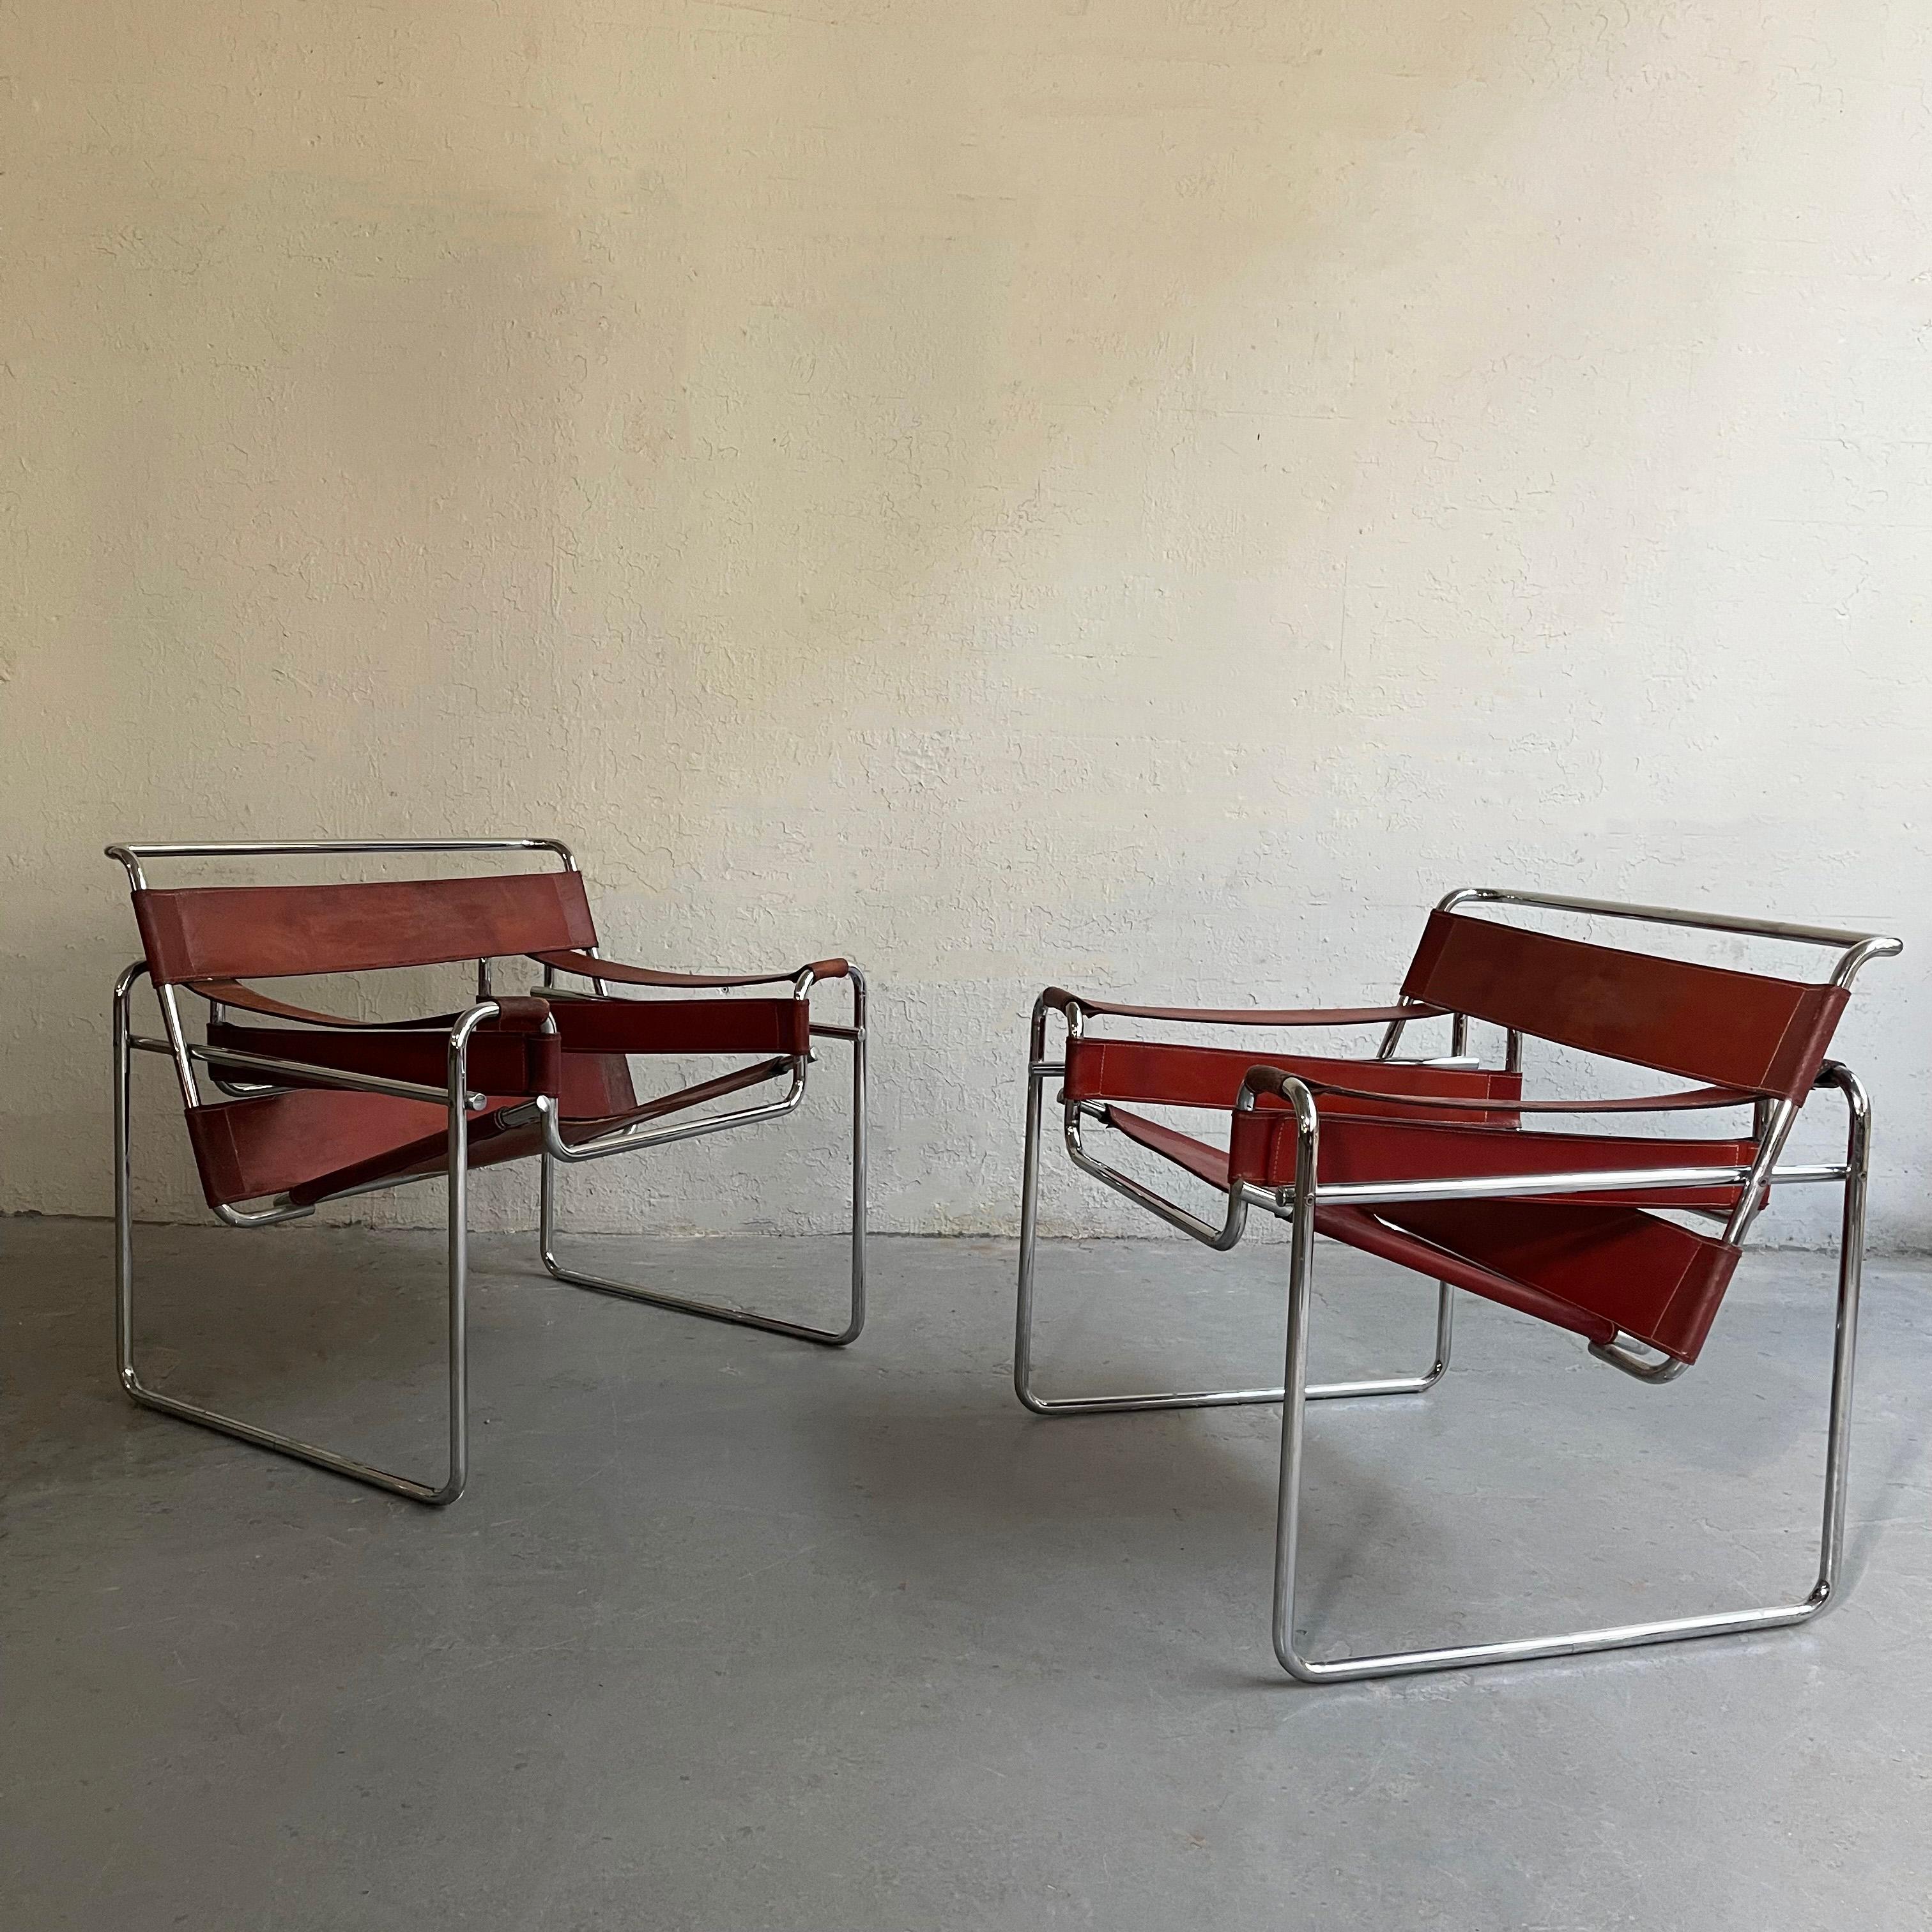 American Marcel Breuer Bauhaus Wassily Style Chairs Burgundy Brown Leather